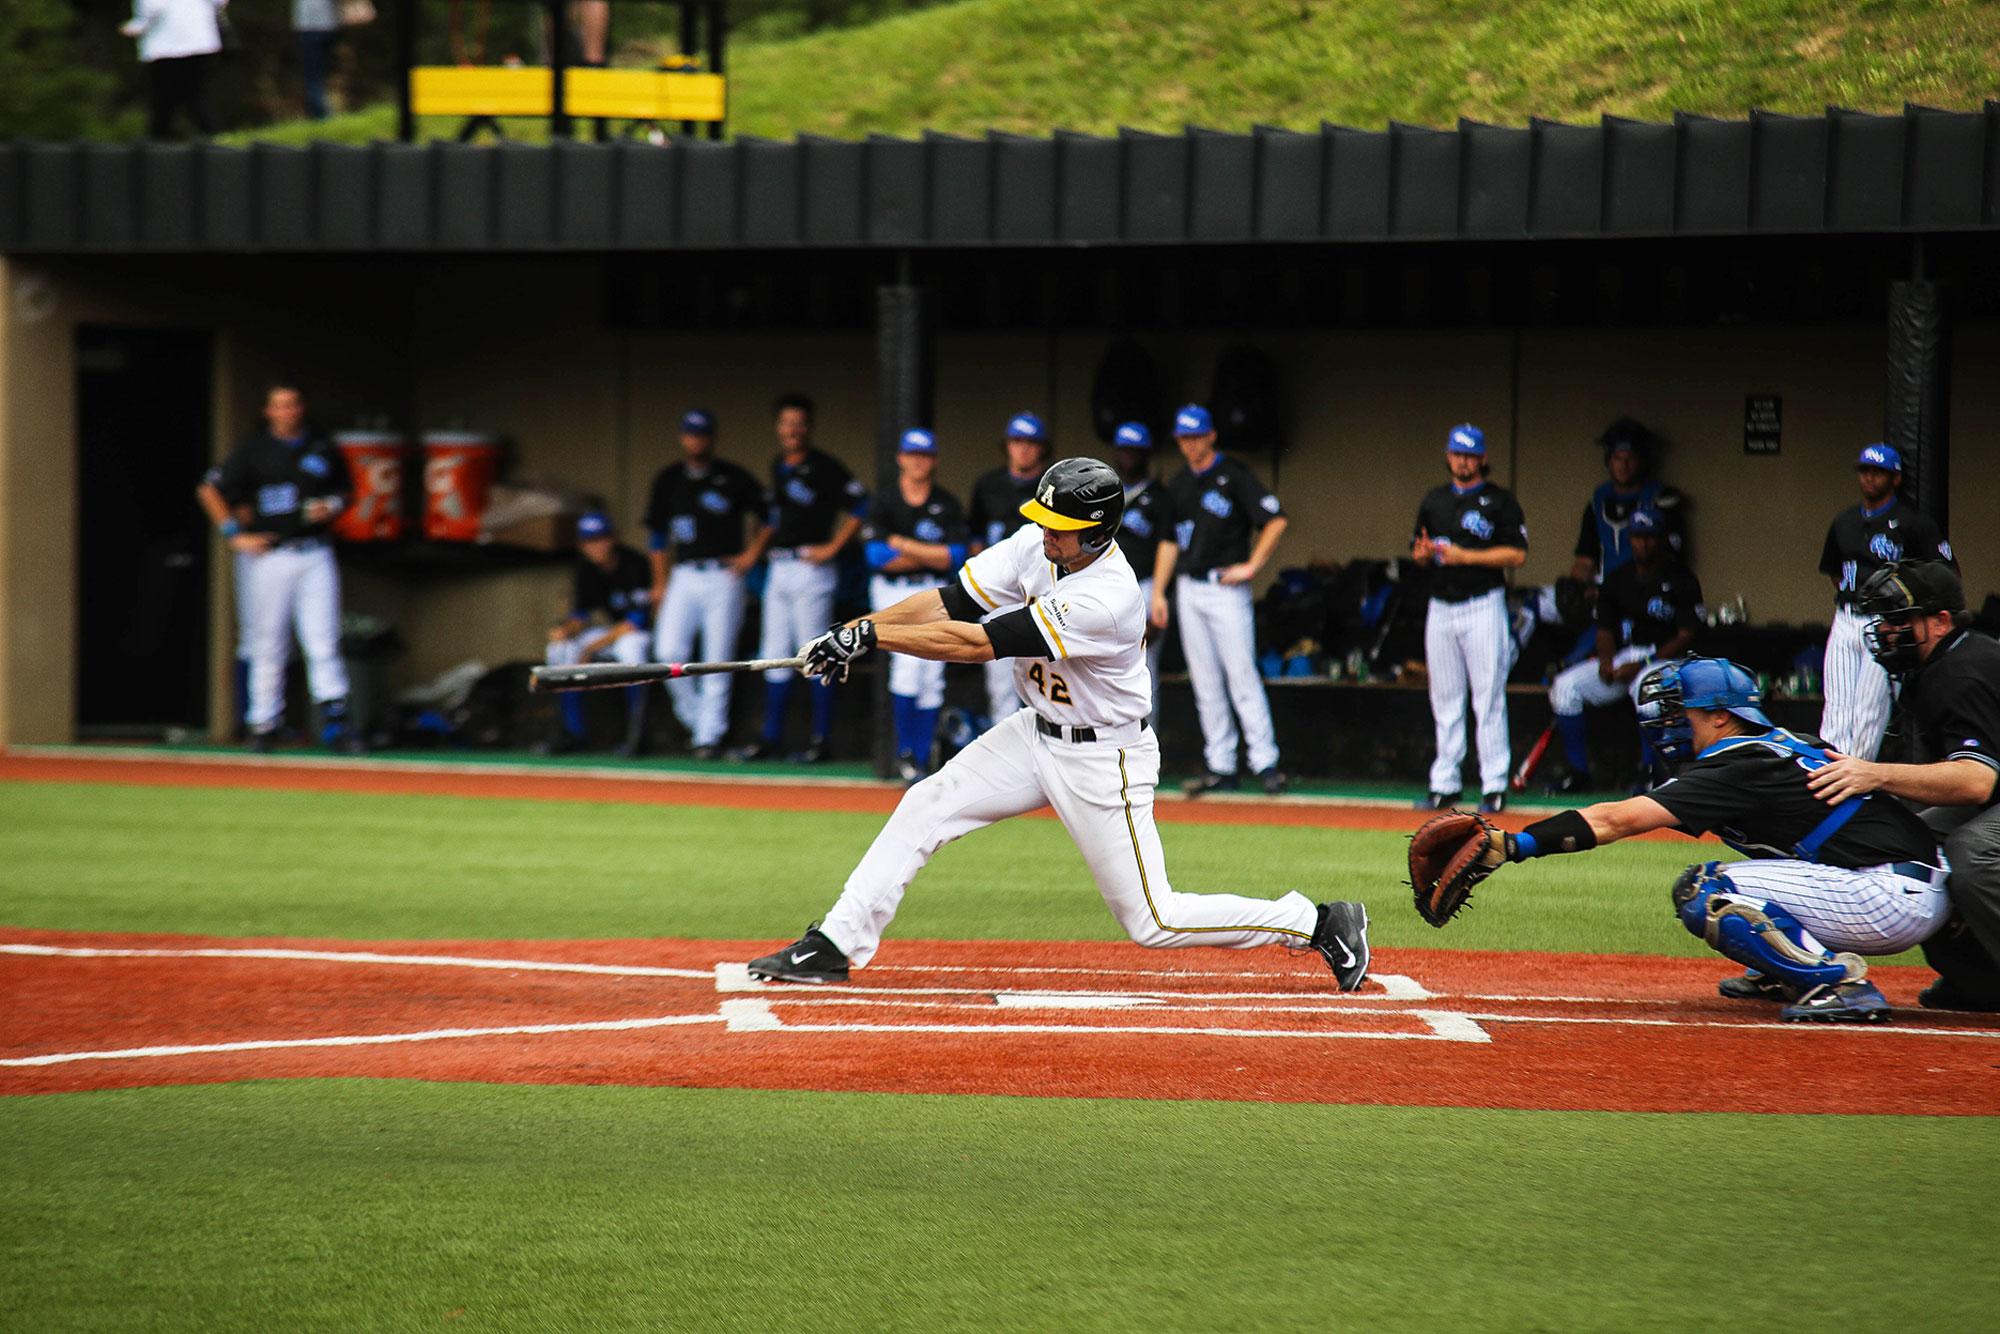 Former infielder Dillon Dobson follows through on a double against Georgia State last season. The Mountaineers will seek to replace the production of Dobson,  who was drafted by the San Francisco Giants in the 23rd round of the 2015 MLB Draft. Photo by Gerrit van Genderen  |  The Appalachian